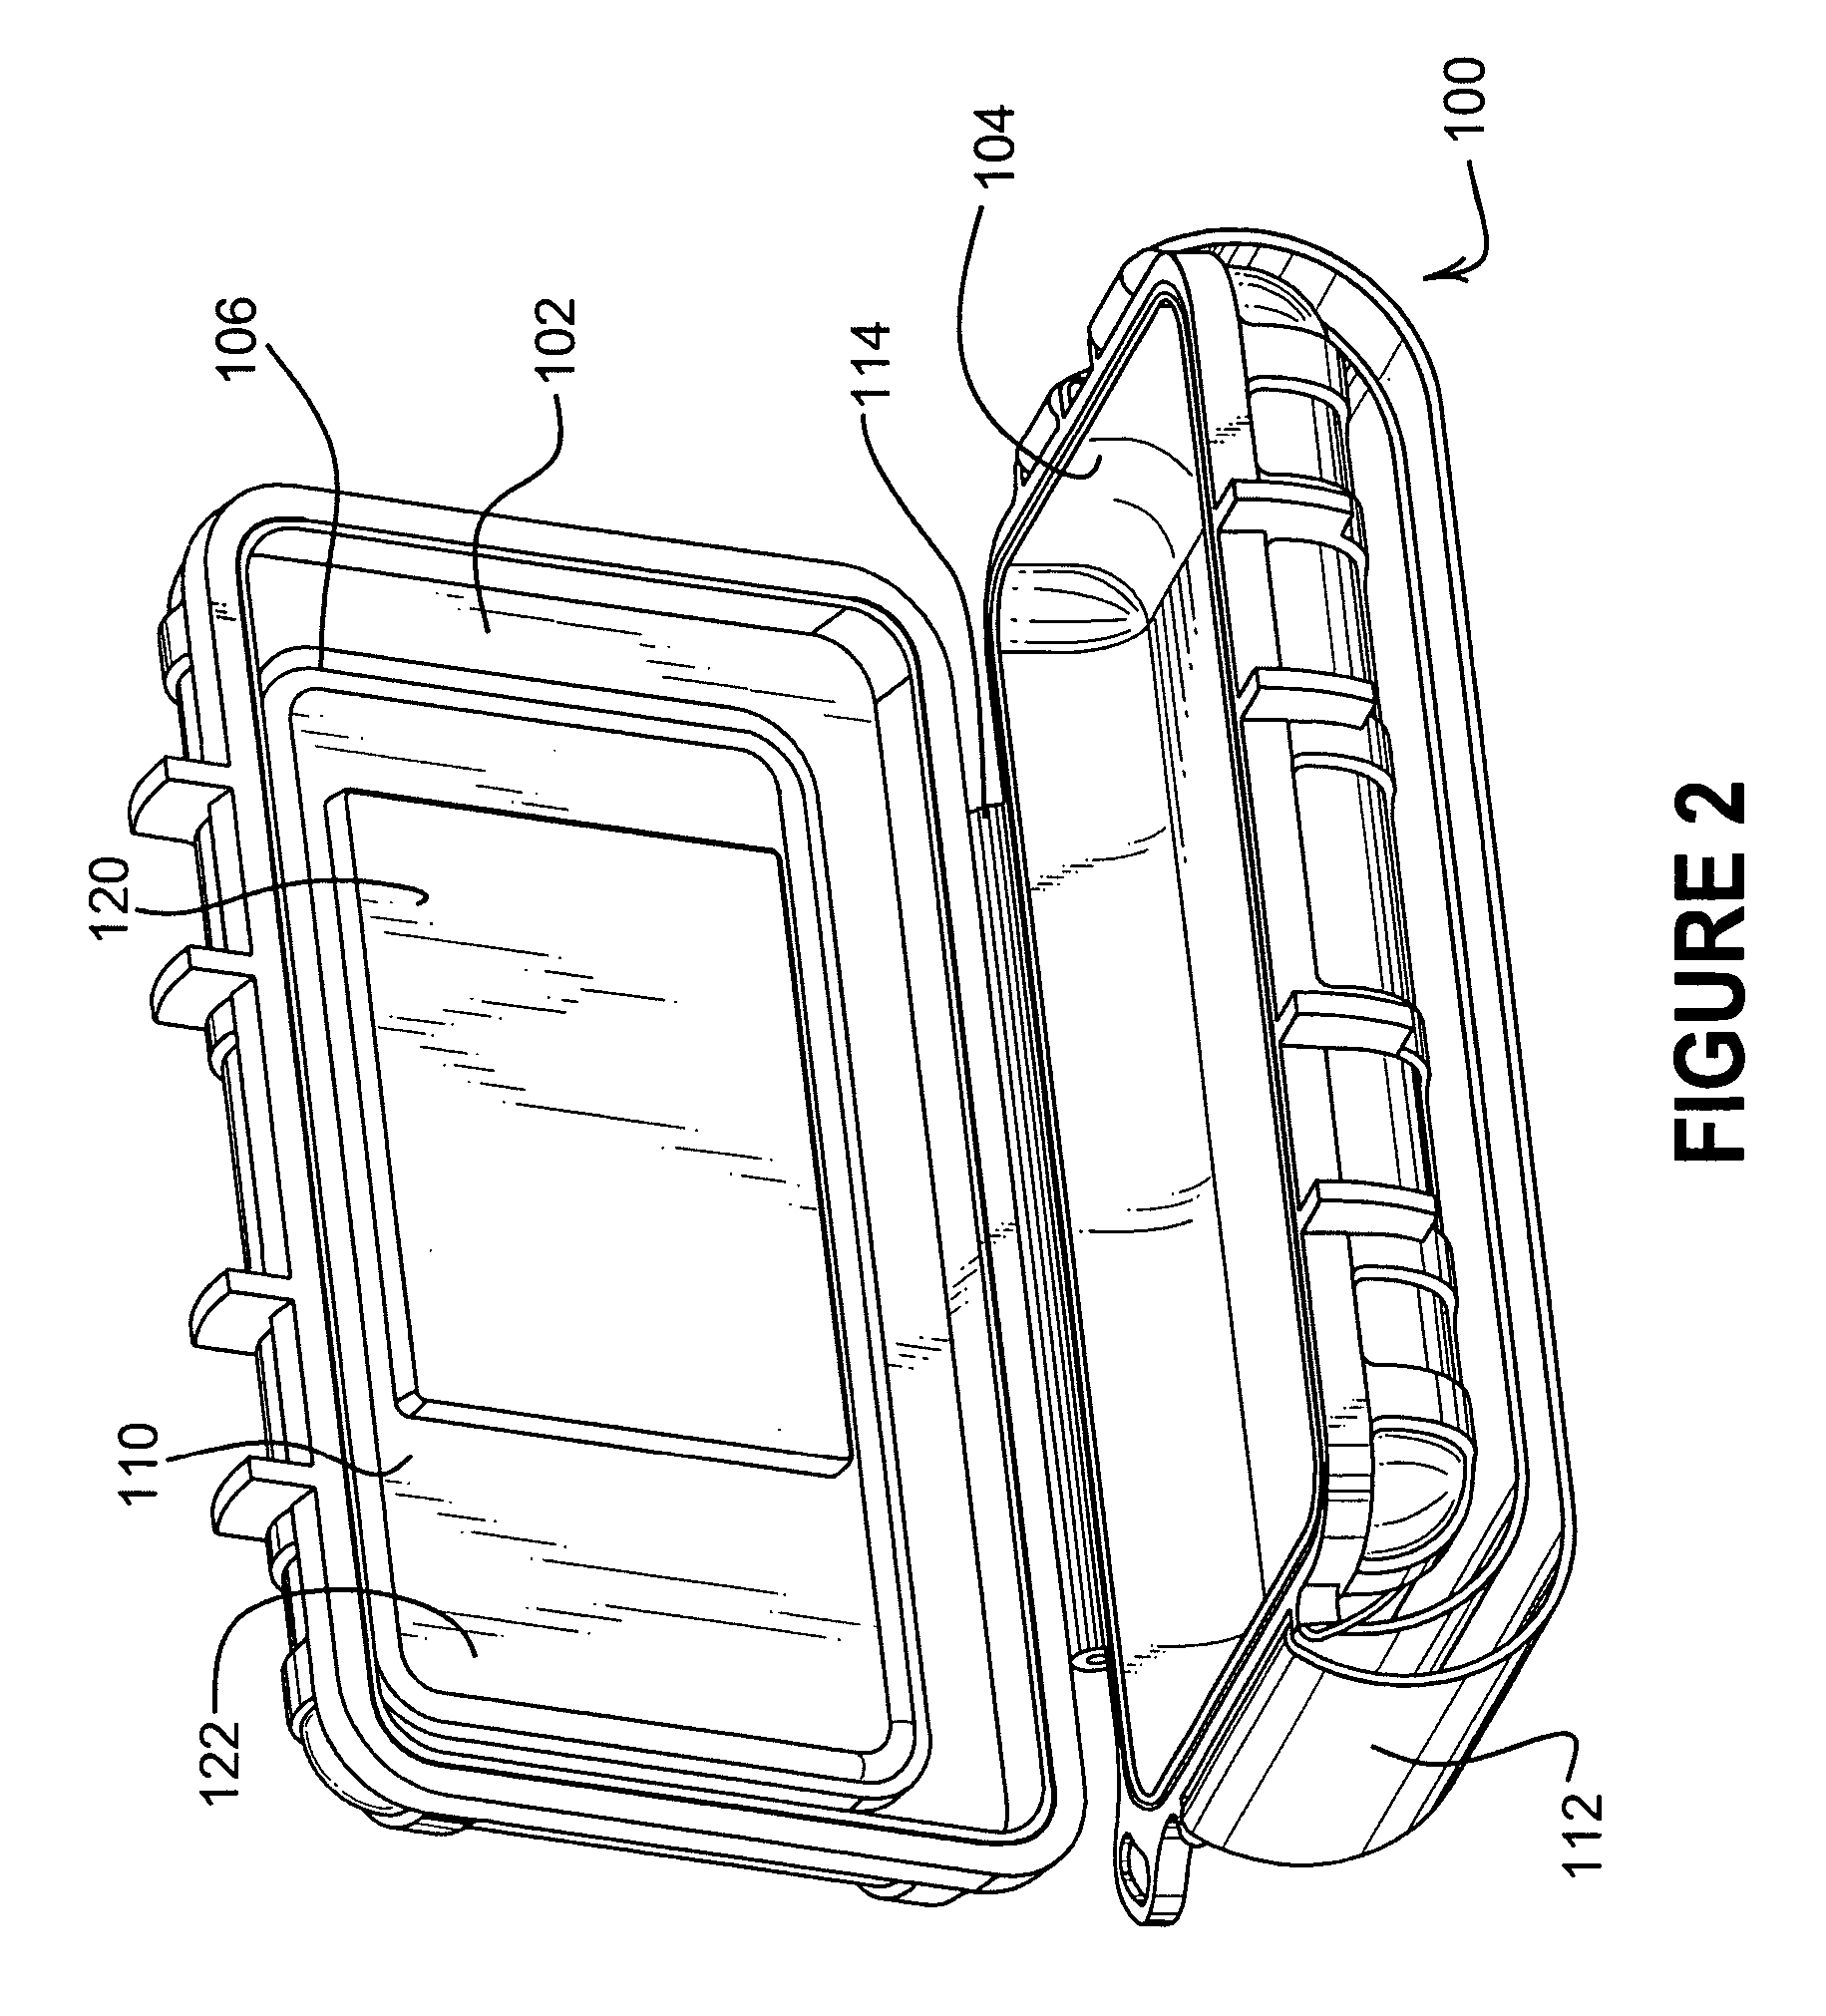 Protective enclosure and watertight adapter for an interactive flat-panel controlled device